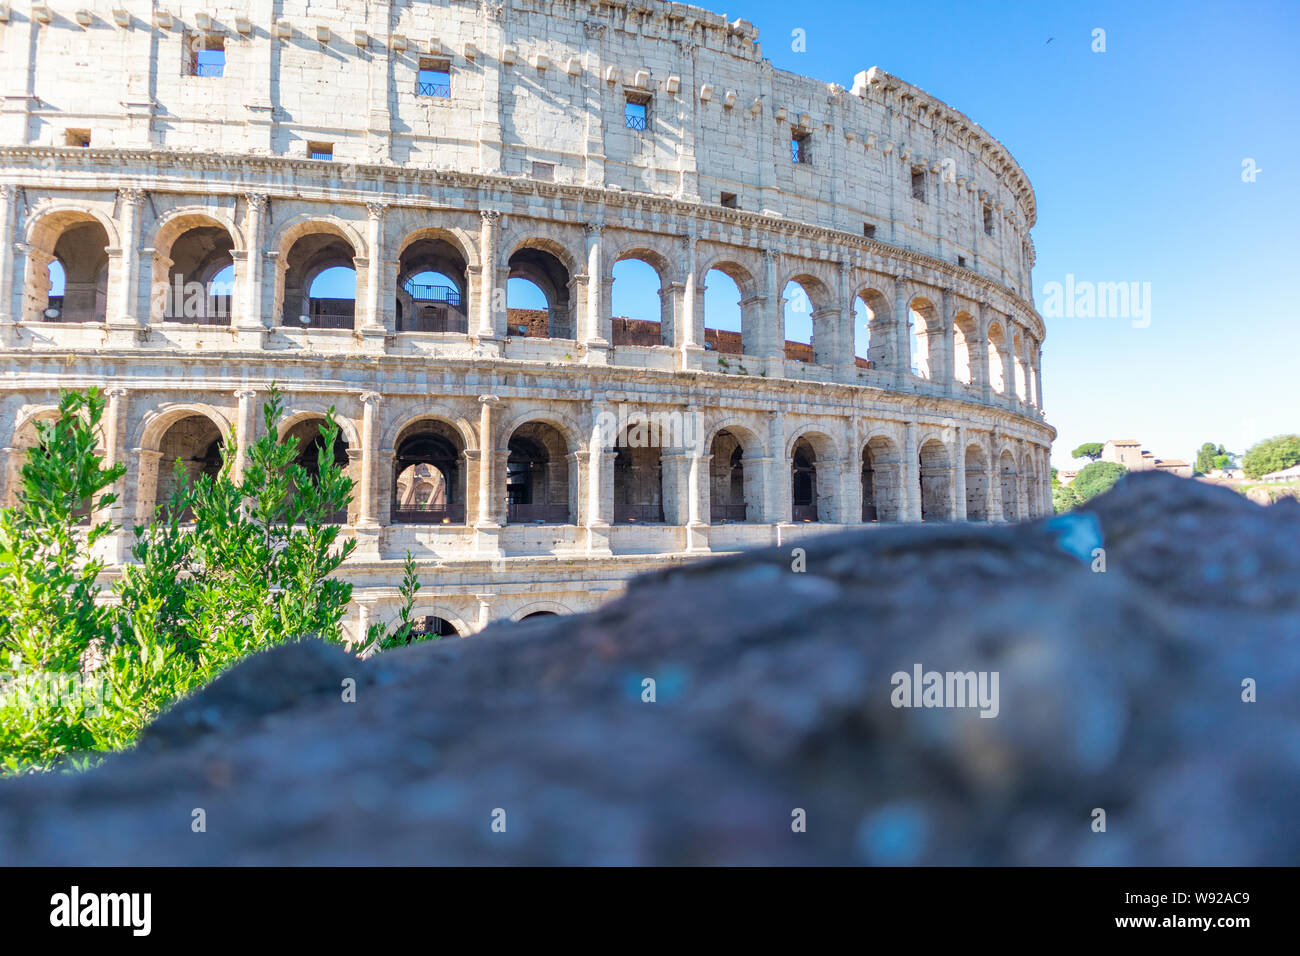 Famous ancient colosseum in Rome Stock Photo